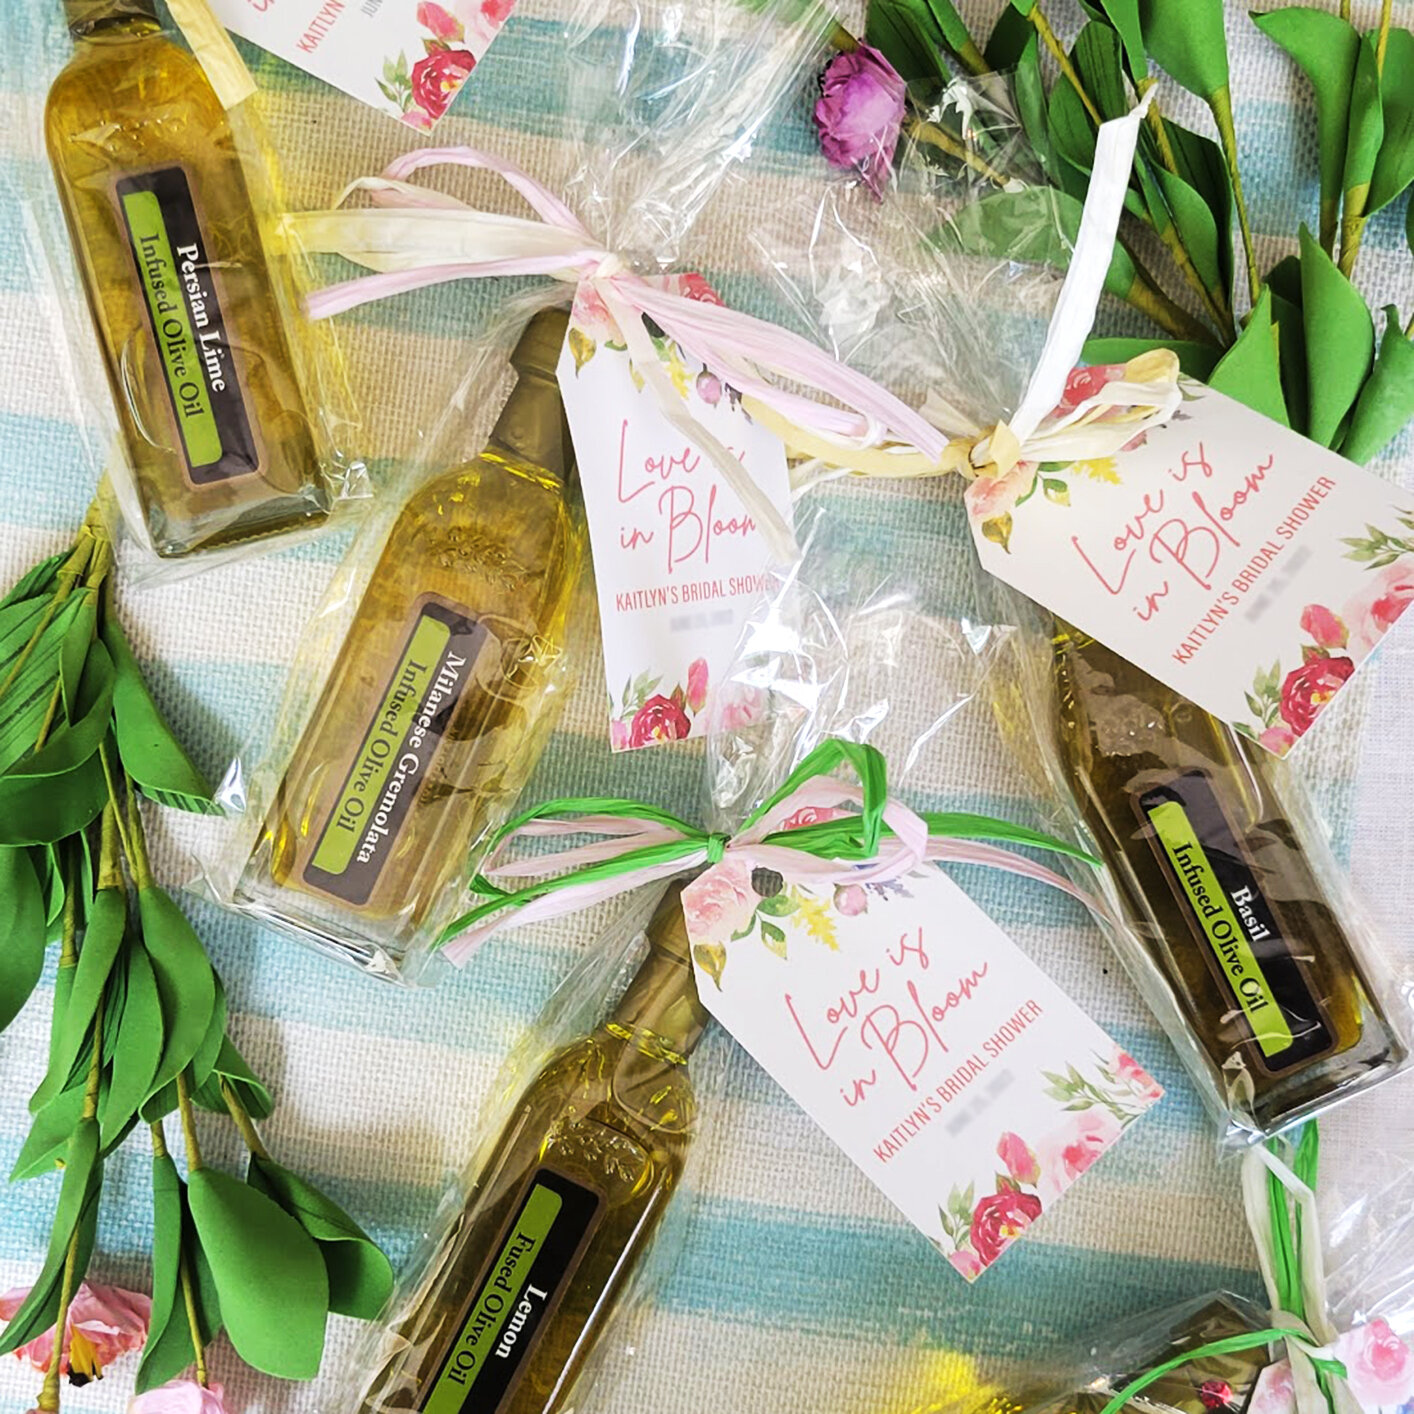 Love is in Bloom 💕 Make your celebration unforgettable with personalized party favors crafted with love and care. 💖 Message us or email info@phatoliveoil.com to get started